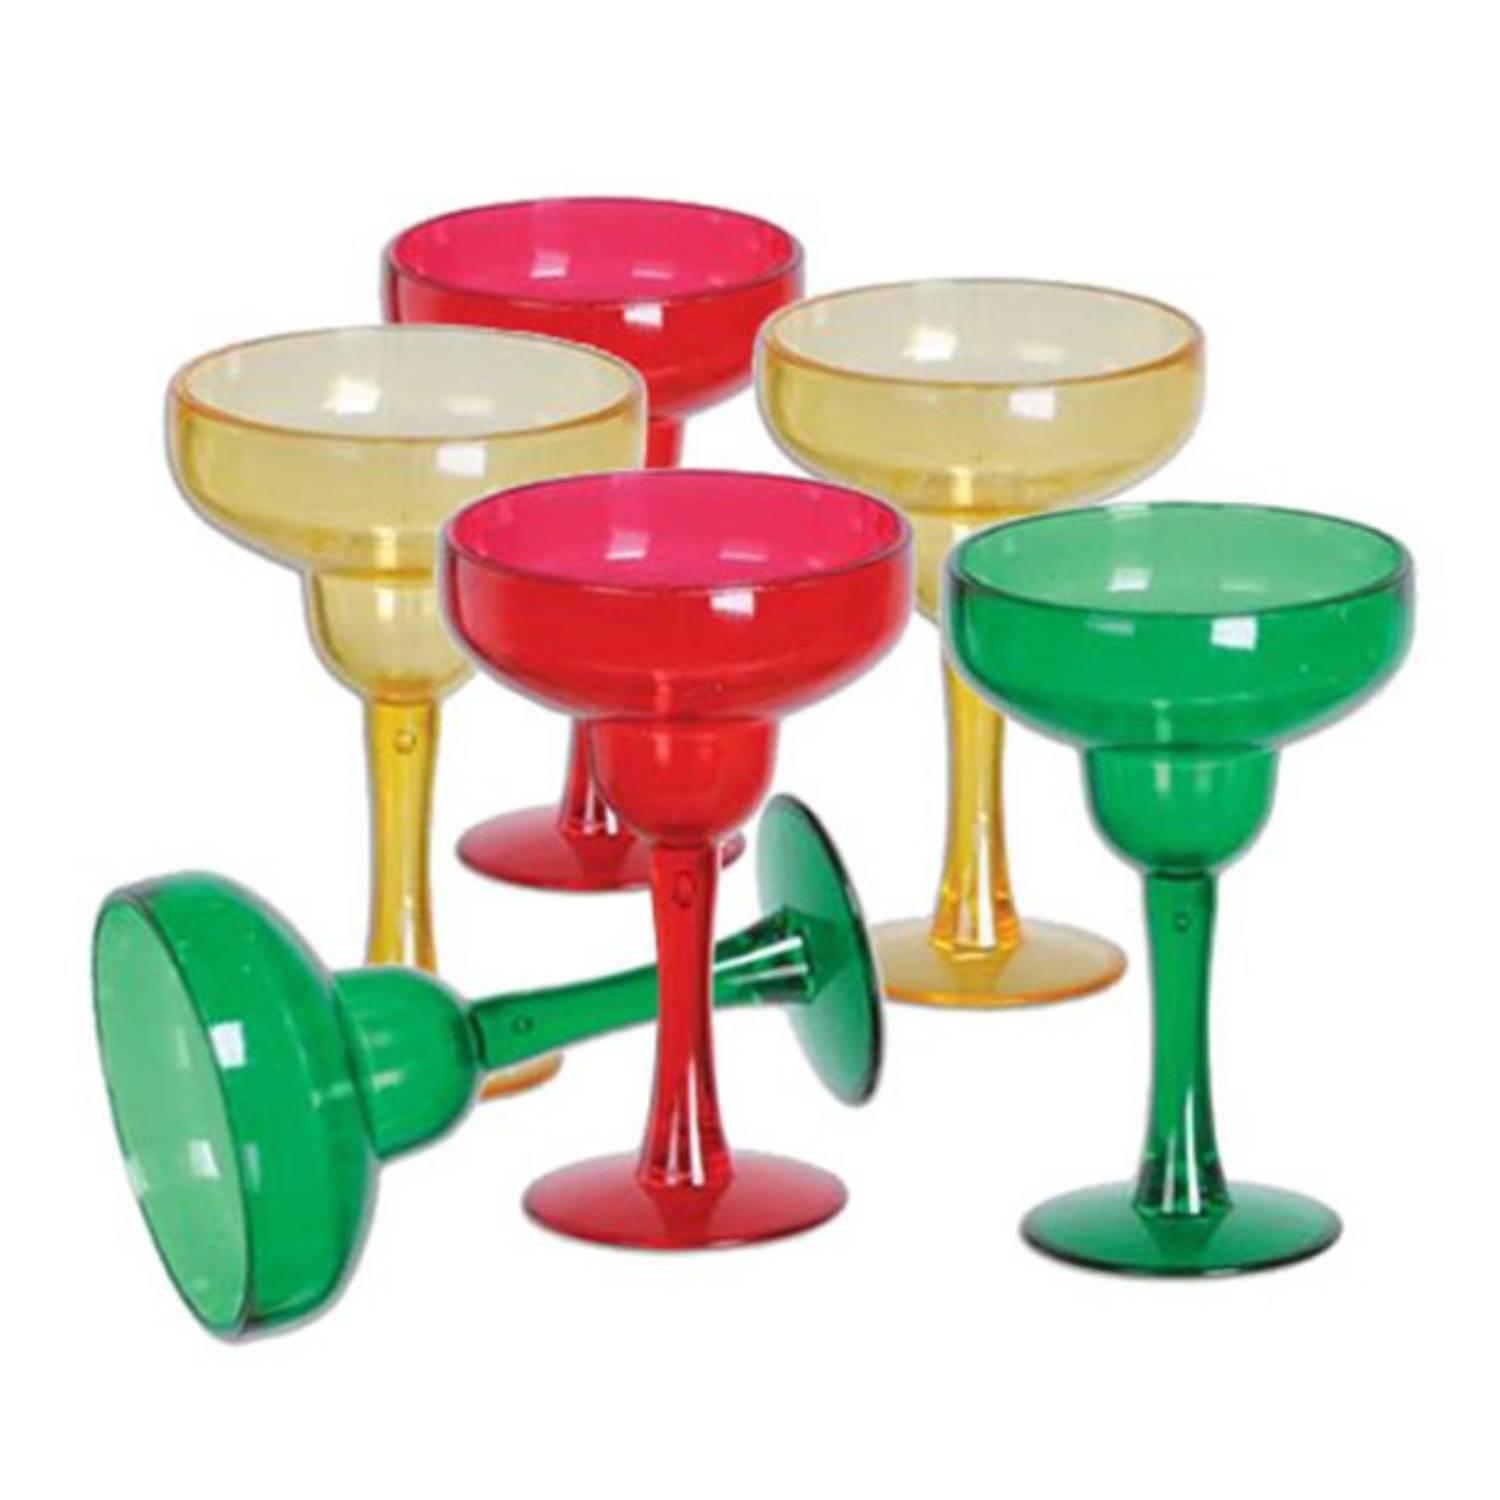 Pk6 Mini-Margarita Shot Glasses 30ml capacity by Beistle 57660 available here at Karnival Costumes online party shop